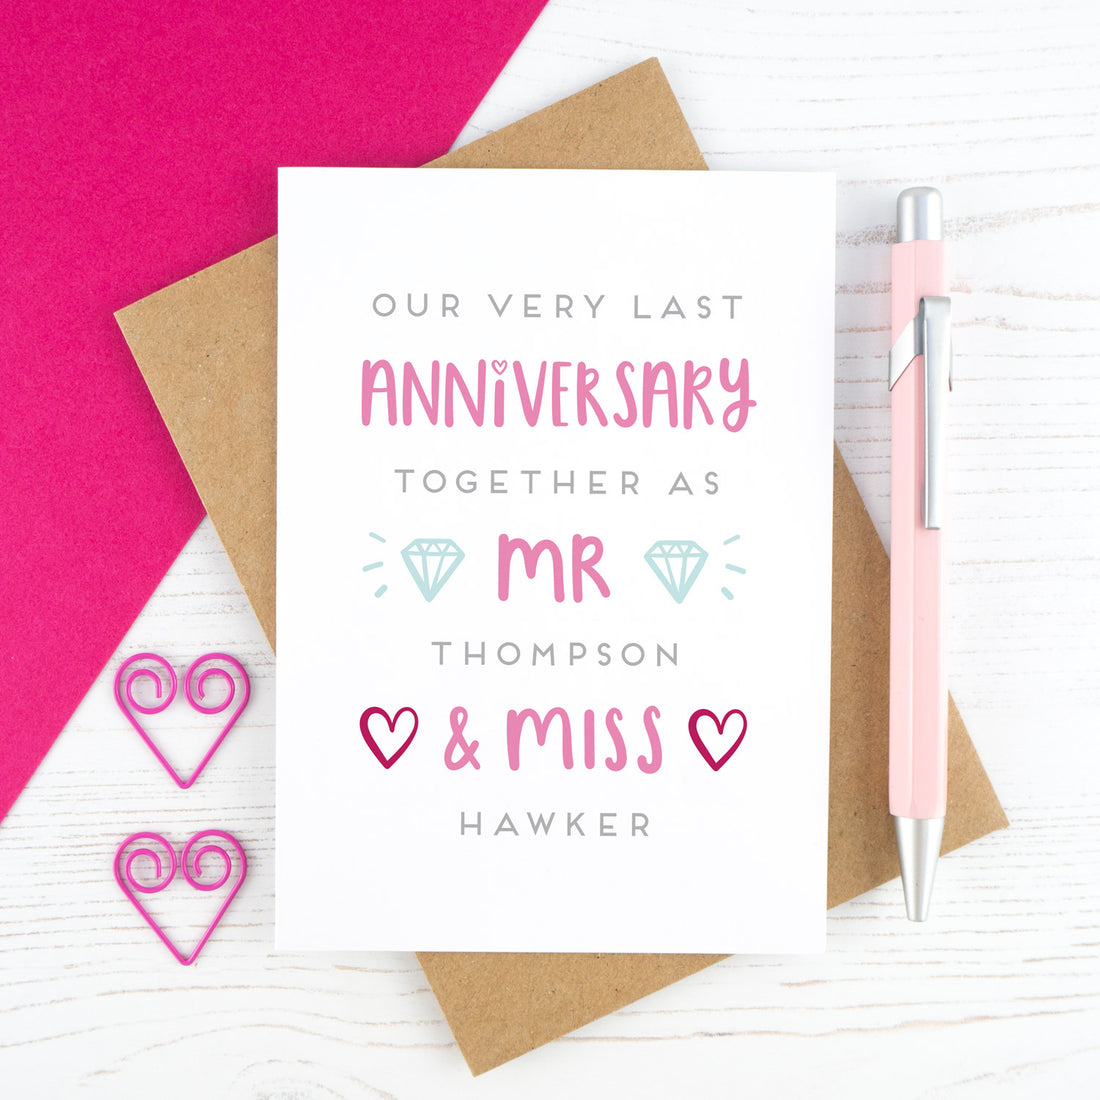 What to write in an Anniversary card